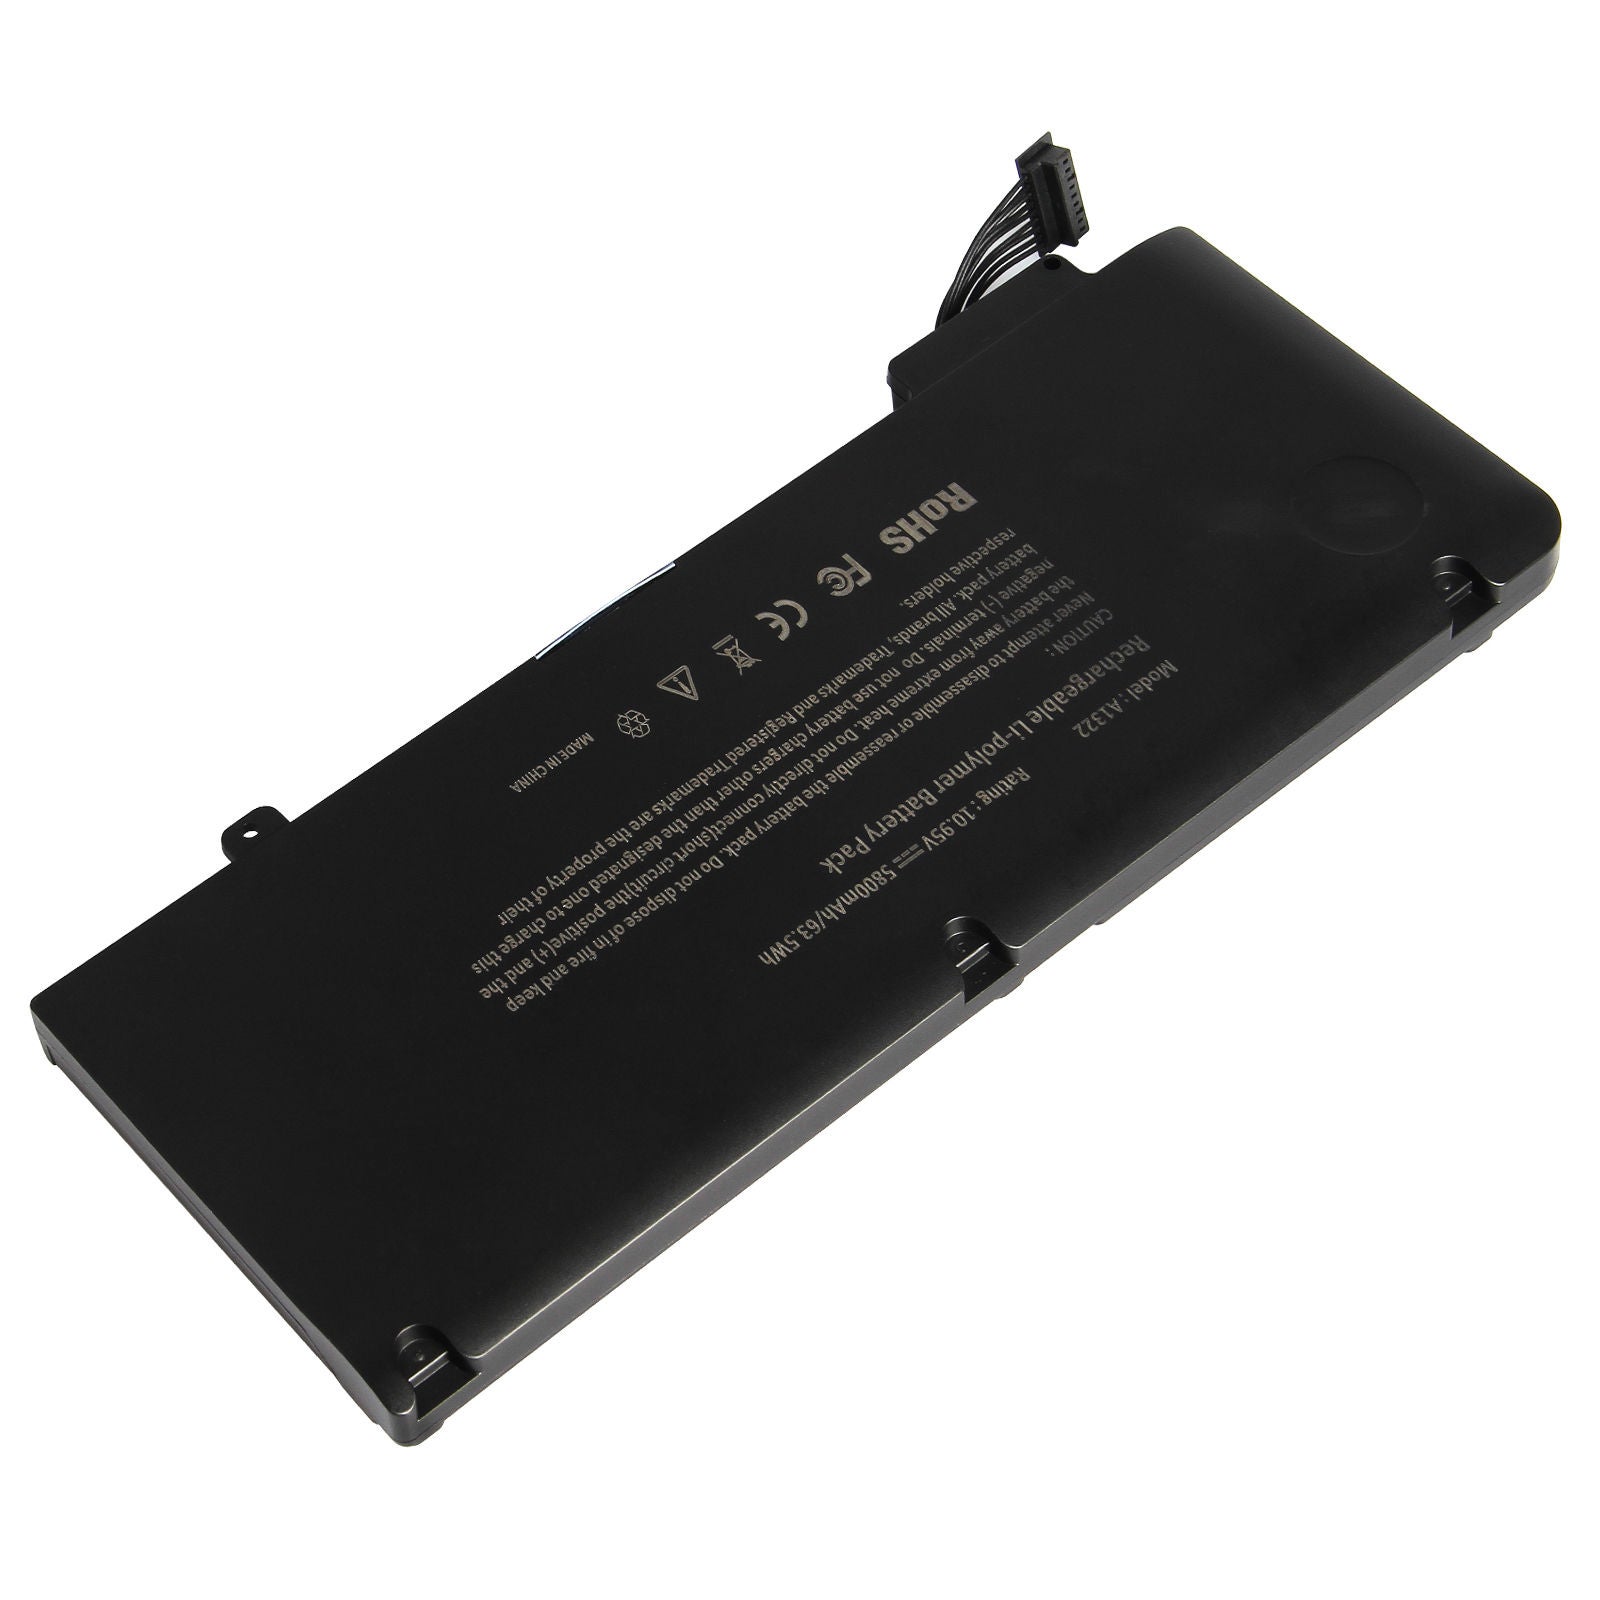 Apple MacBook Pro 13 inch A1278 2009 Replacement Battery